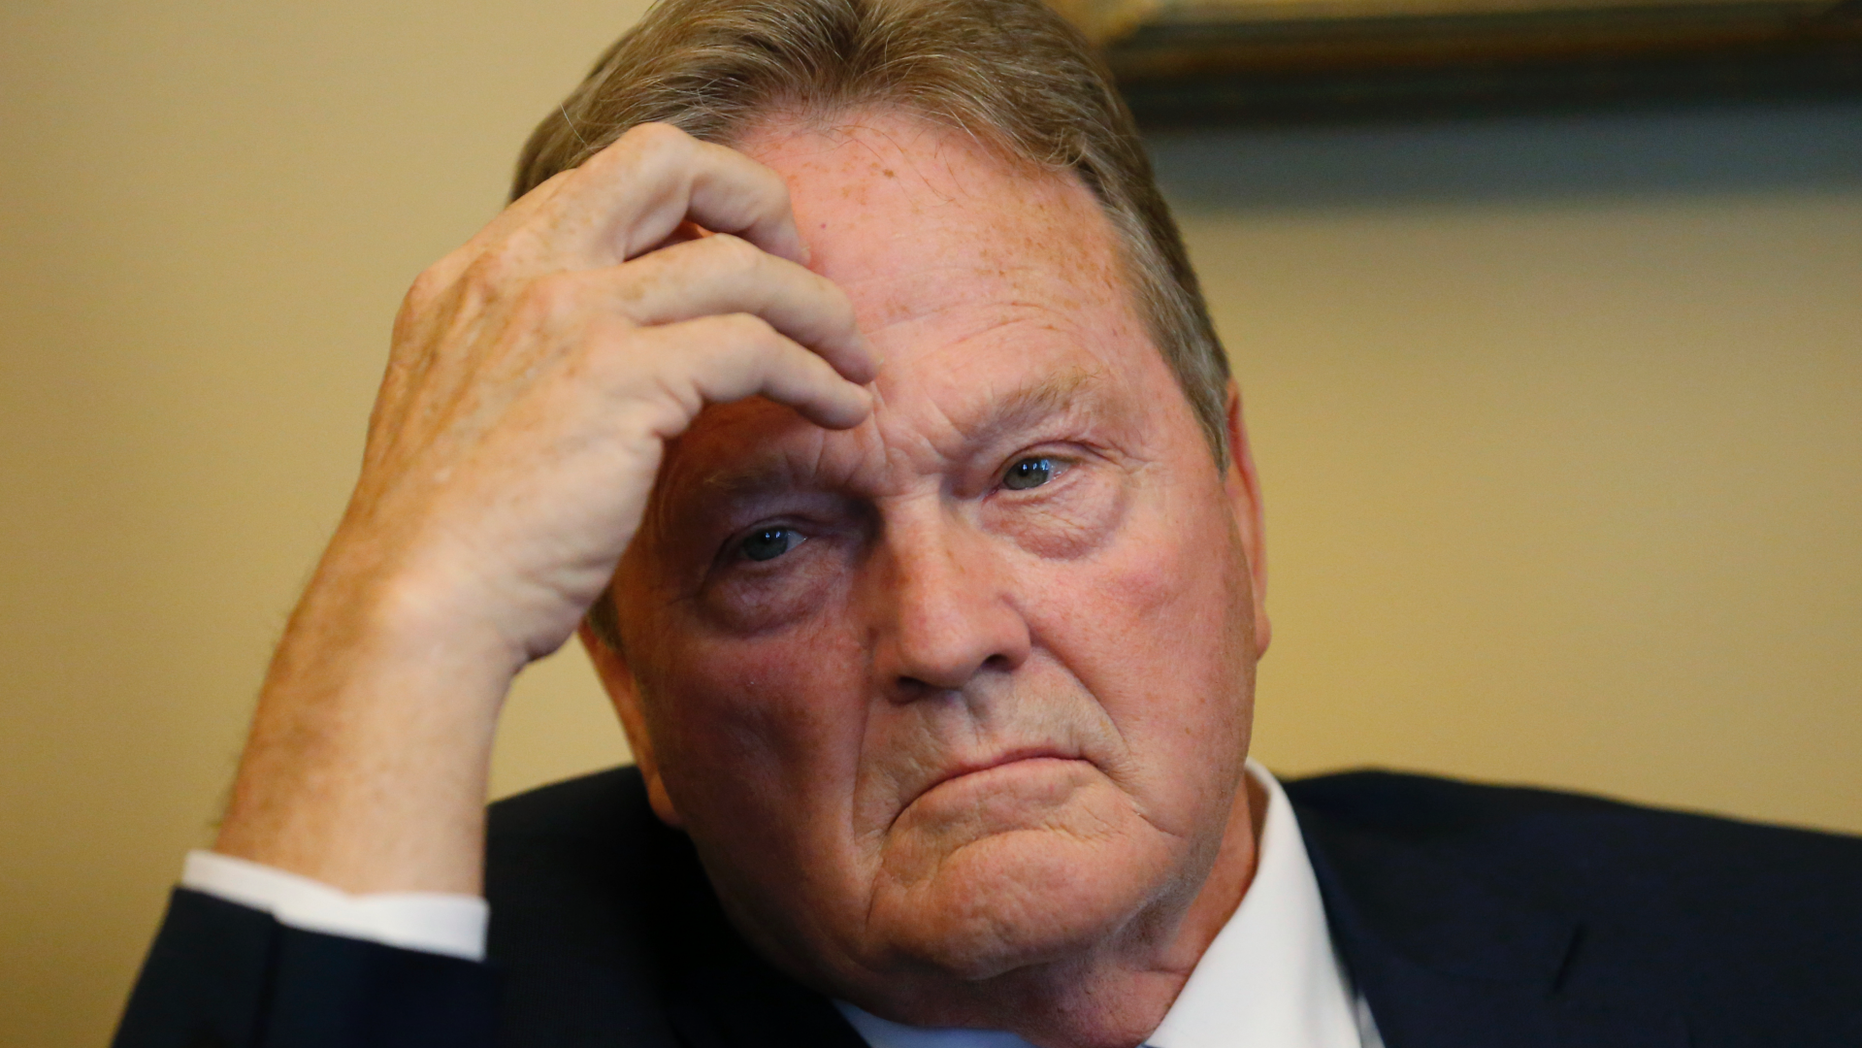 In this Jan. 28, 2019, photo, Republican Sen. Jerry Stevenson, looks on during a news conference, in Salt Lake City. The state Senate easily passed a measure on Tuesday, Feb. 26, 2019 that would bring it in line with most other states in doing away with low-alcohol beers. It now goes to the House, where it's expected to face more opposition. (AP Photo/Rick Bowmer)